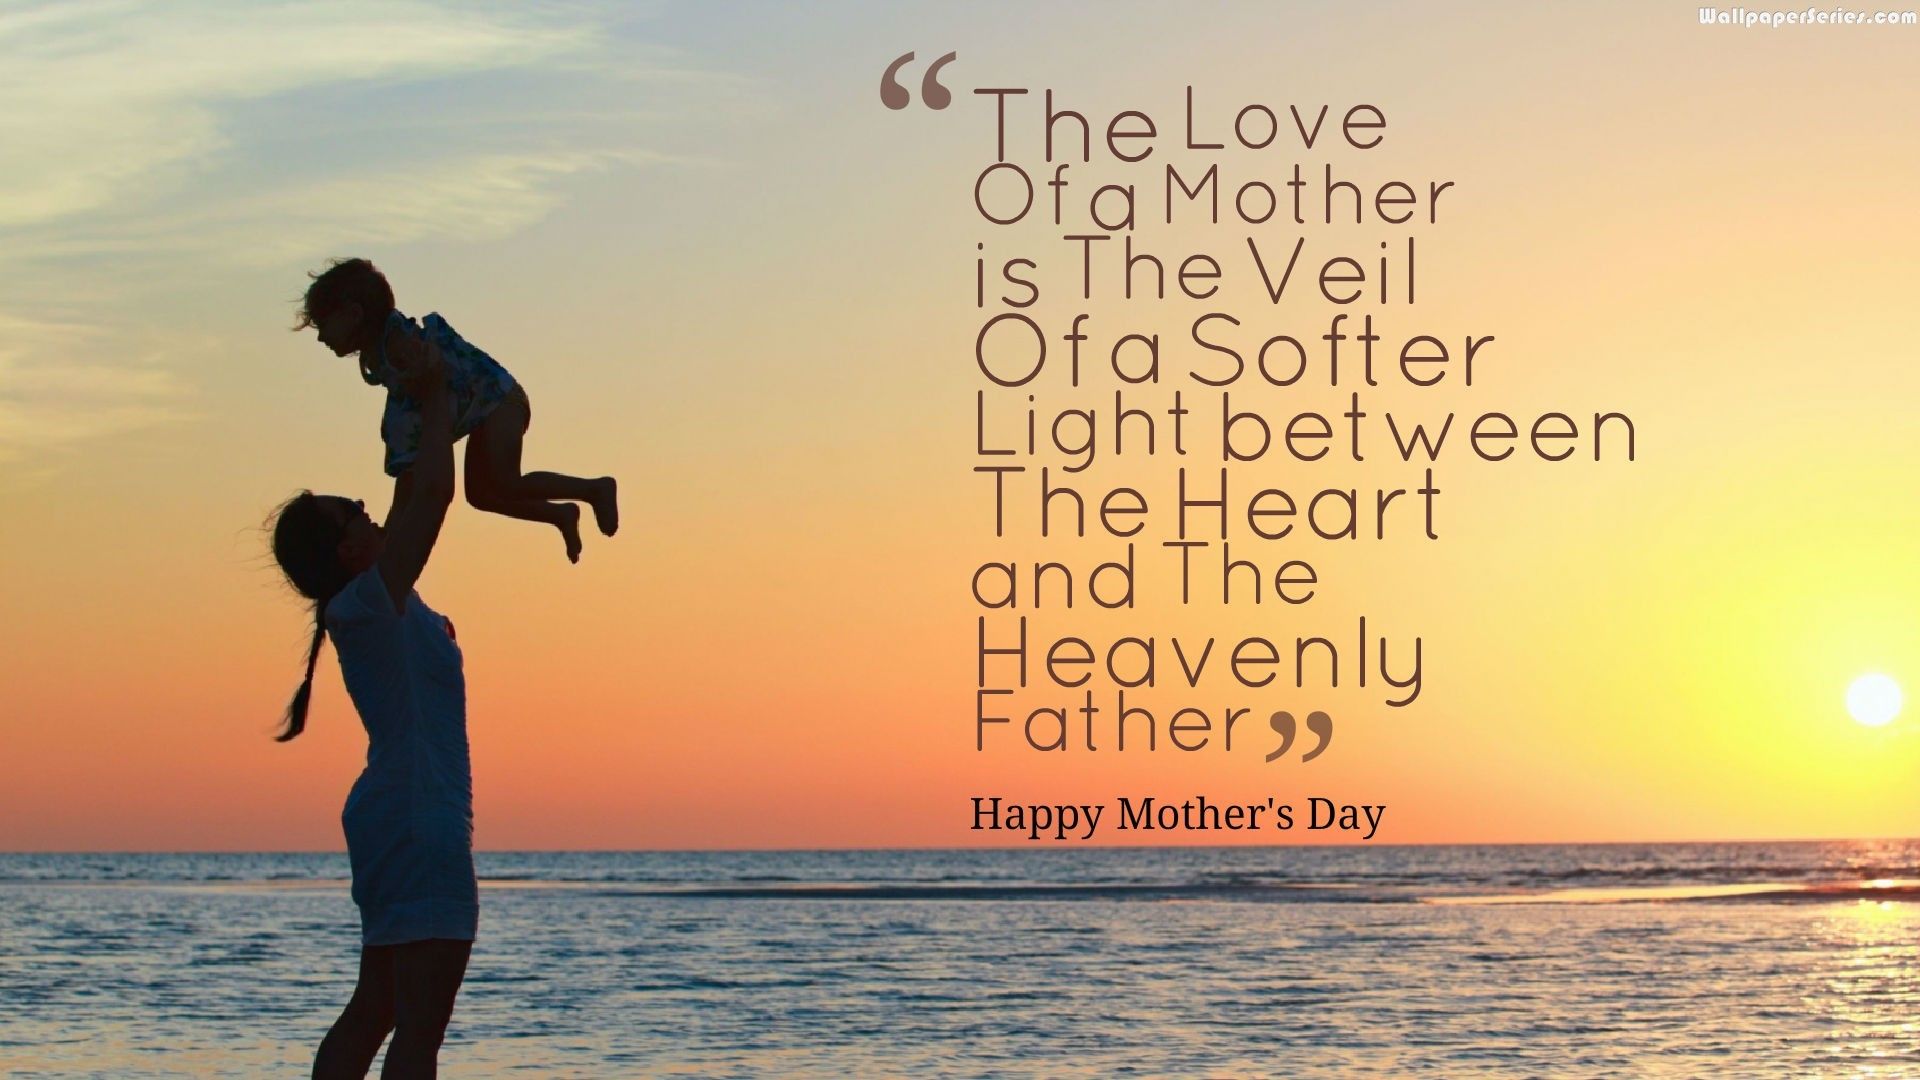 Heavenly Mothers Day Quotes Wallpaper 05780